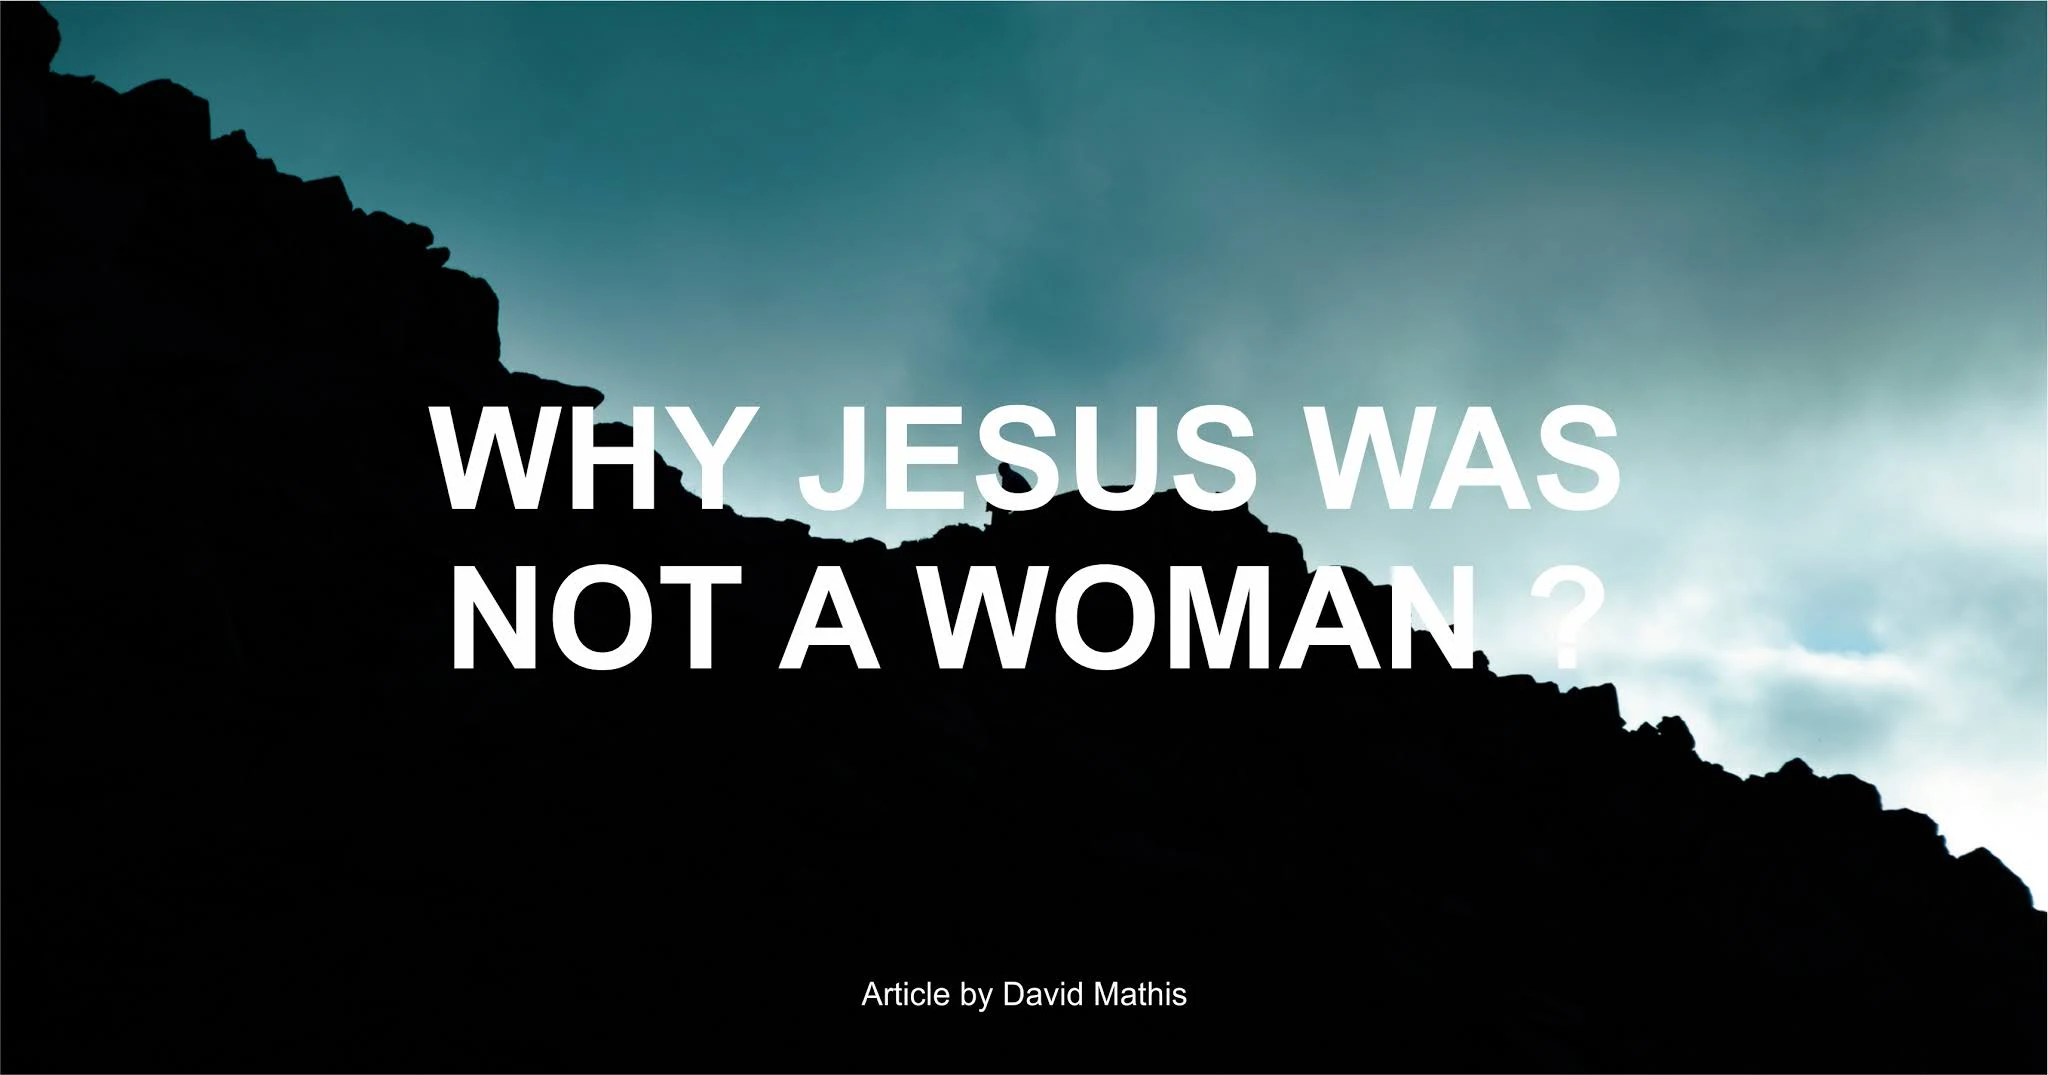 Why Jesus Was Not a Woman - Article by David Mathis